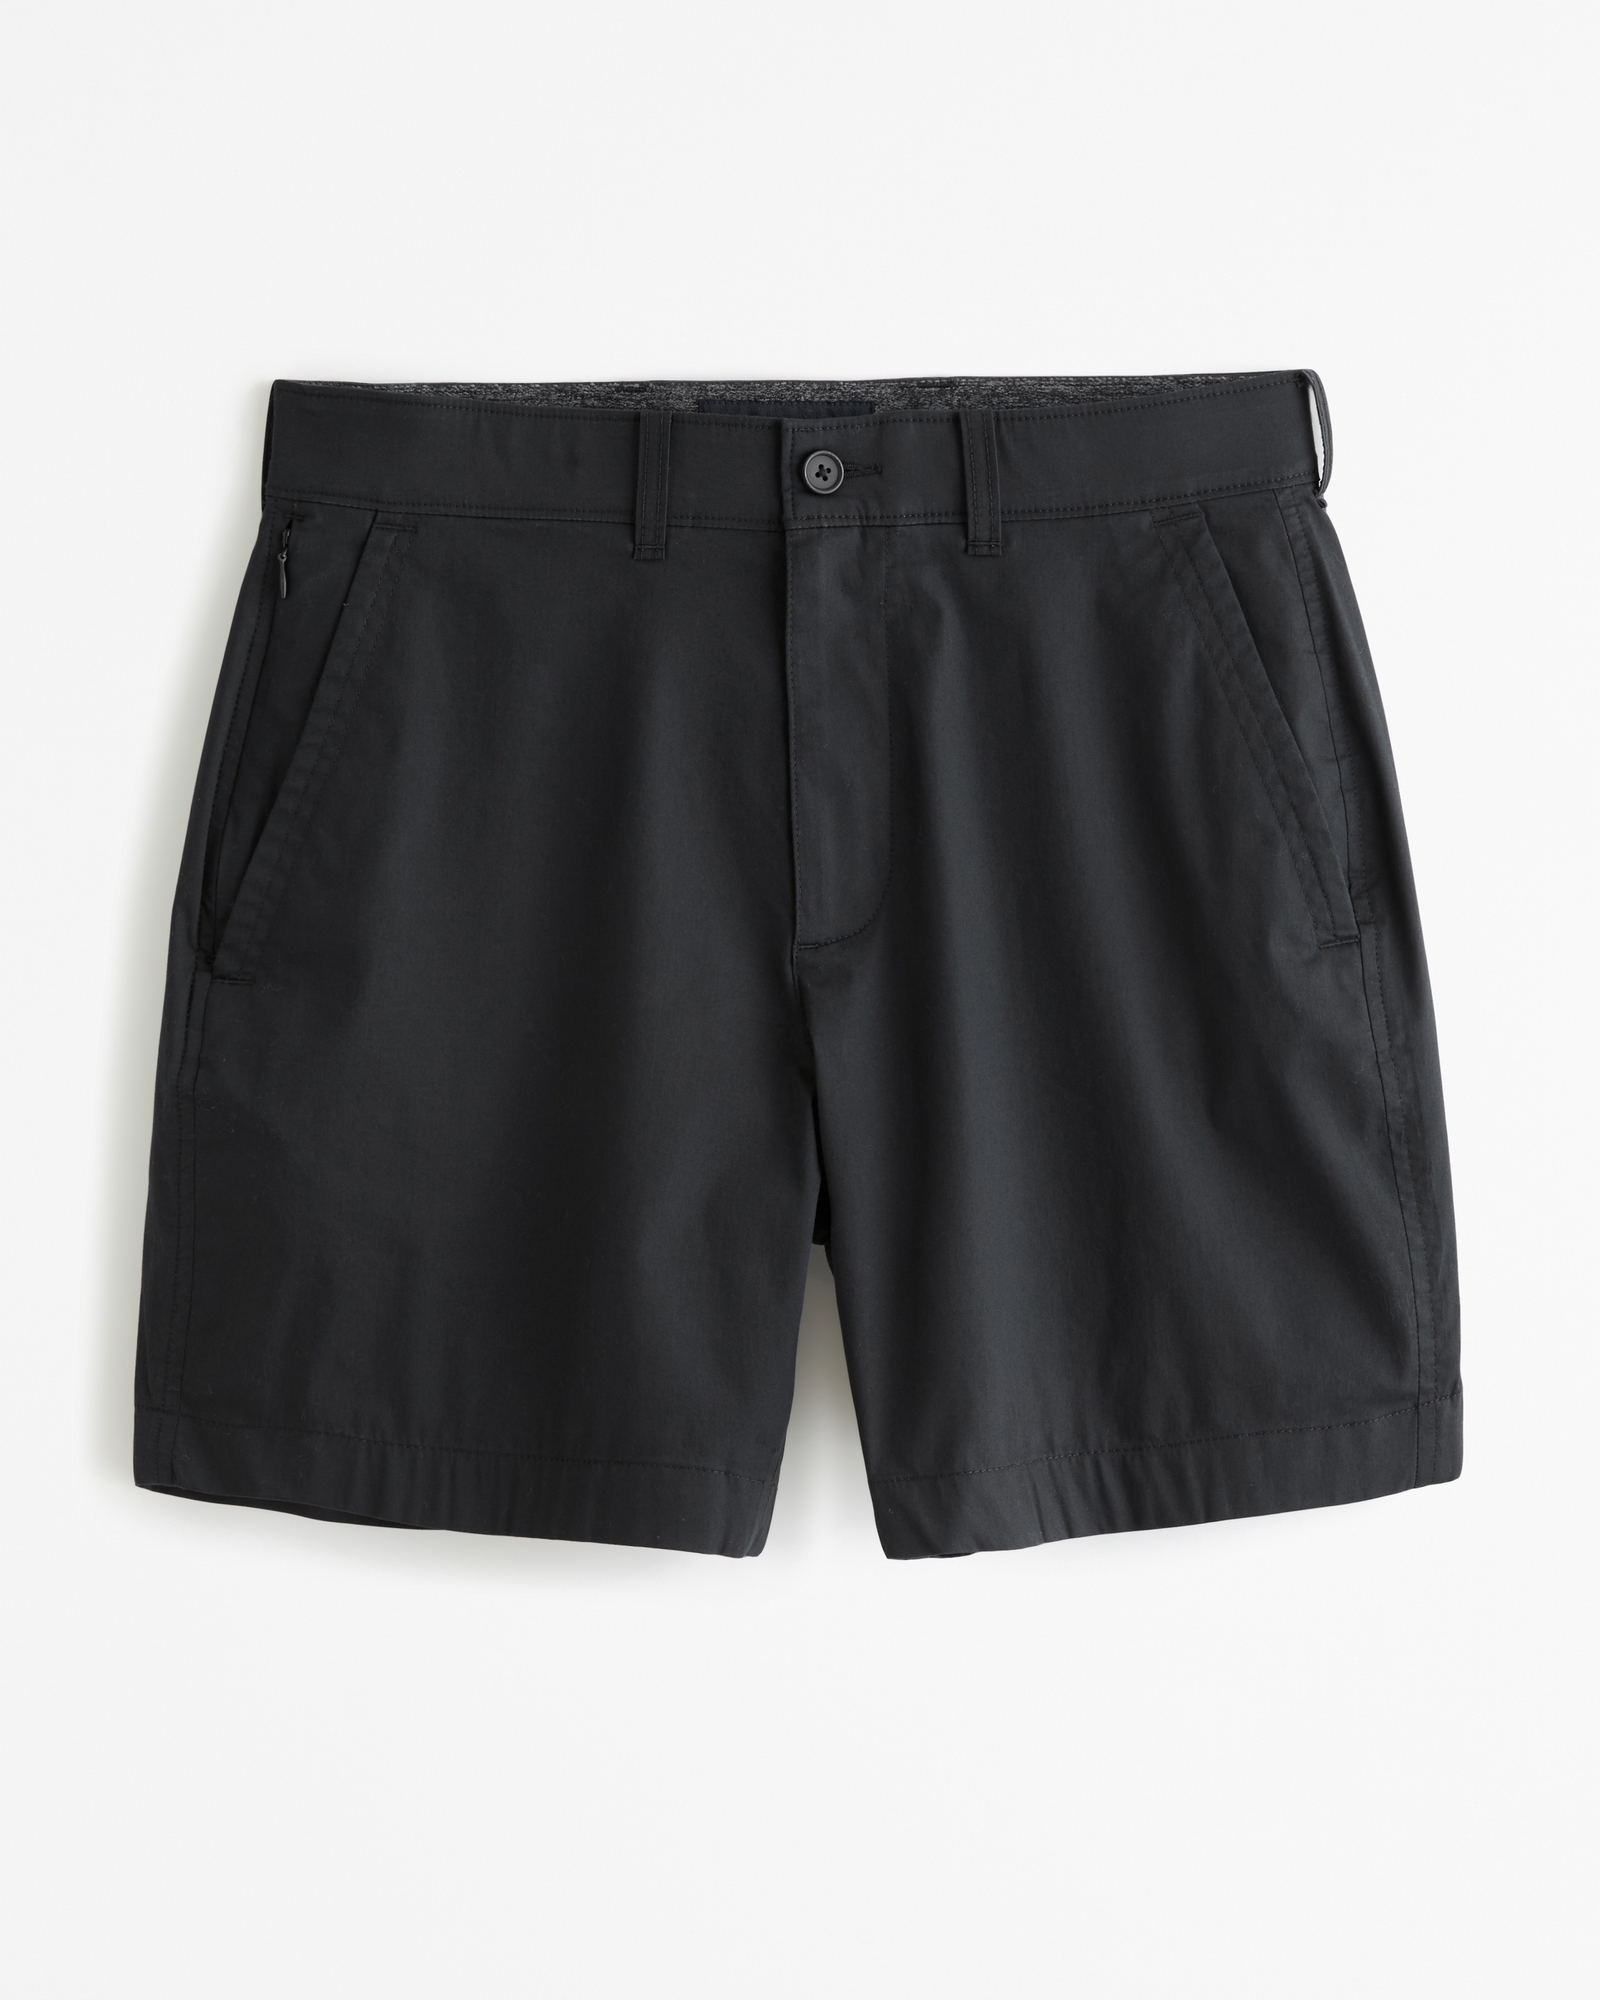 A&F Athletic Fit All-Day Short